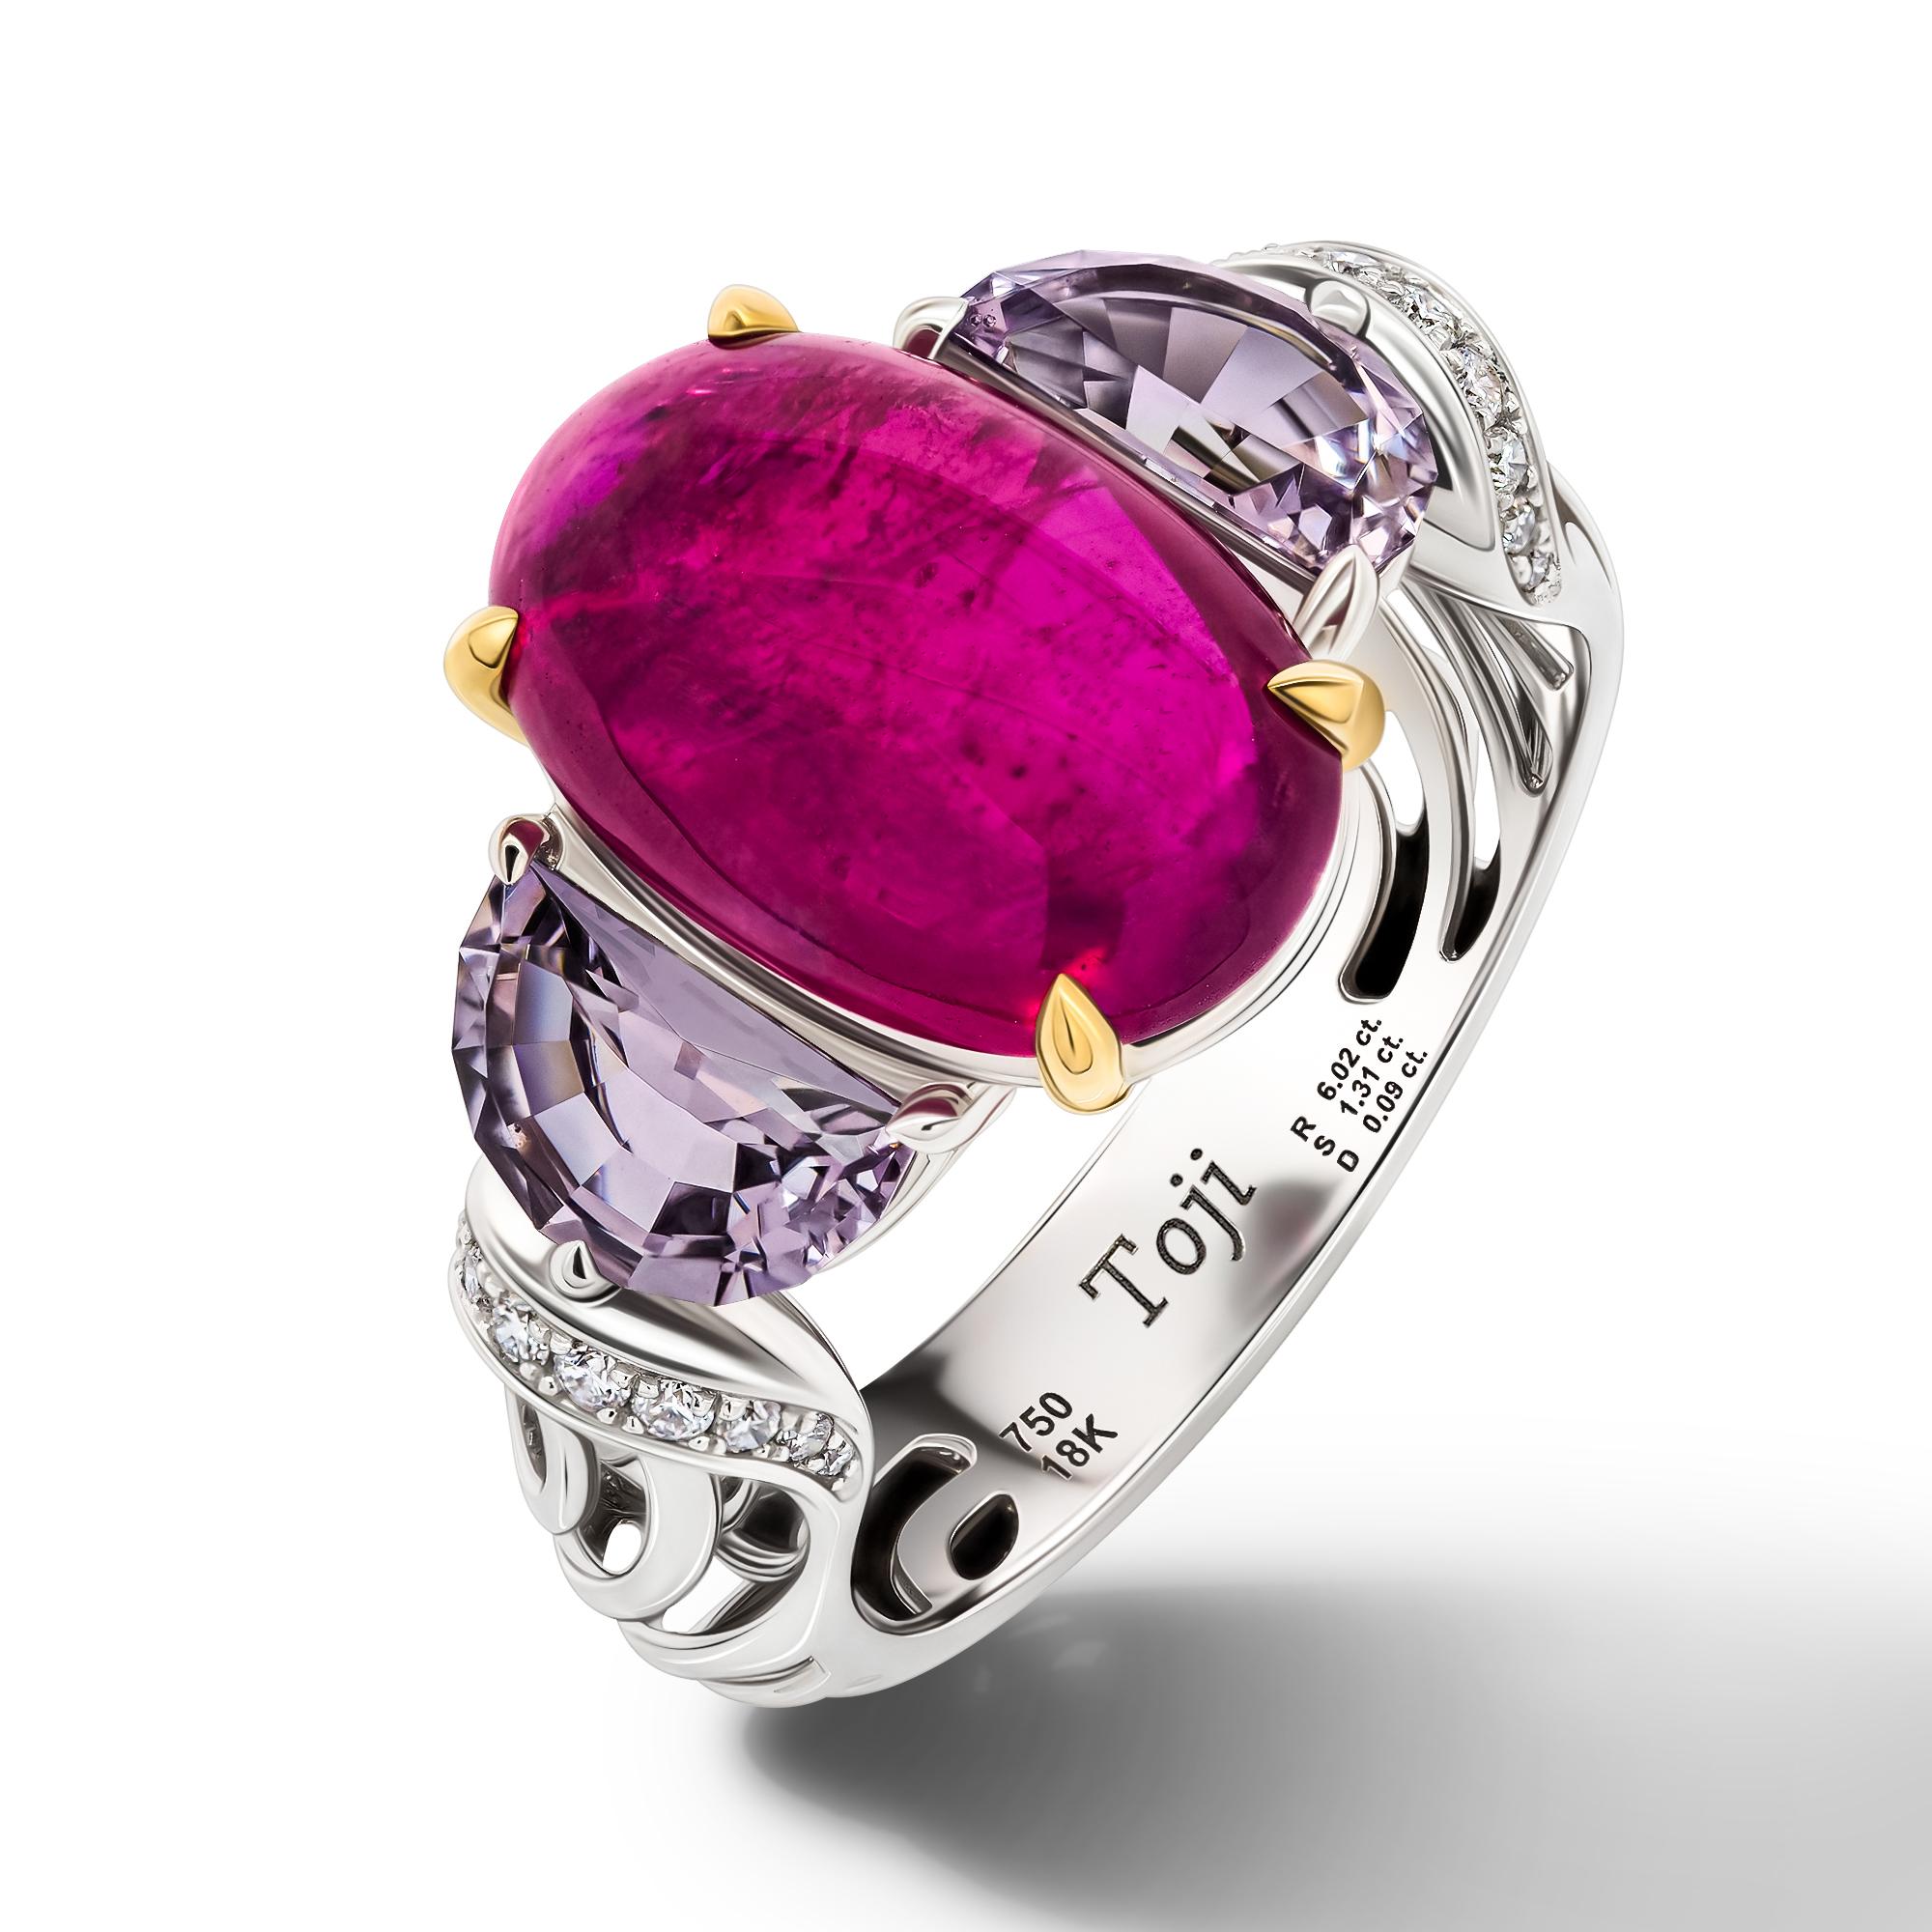 •	18K White gold.  
•	Unheated Ruby Cabochon – total carat weight 6.02. 
•	Lavender spinels in half moon cut – total carat weight 1.31. 
•	Diamonds – 100 pc in round cut – total carat weight 0.50.
•	Ring size – 6' 
•	Lotus GemLab certified. Report